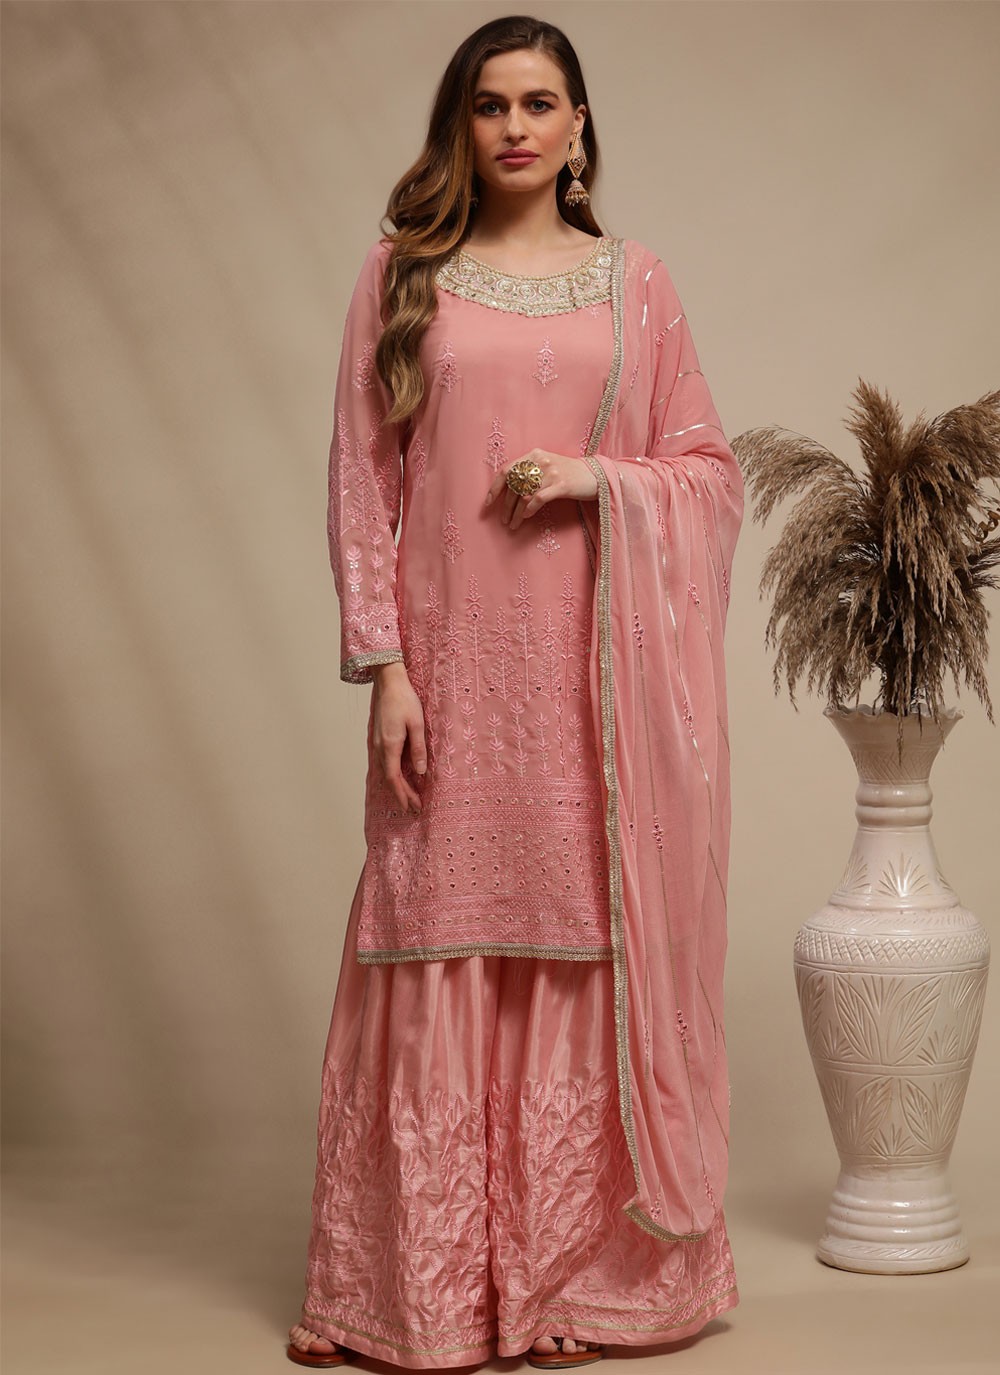 Embroidered Faux Georgette Designer Pakistani Suit in Pink